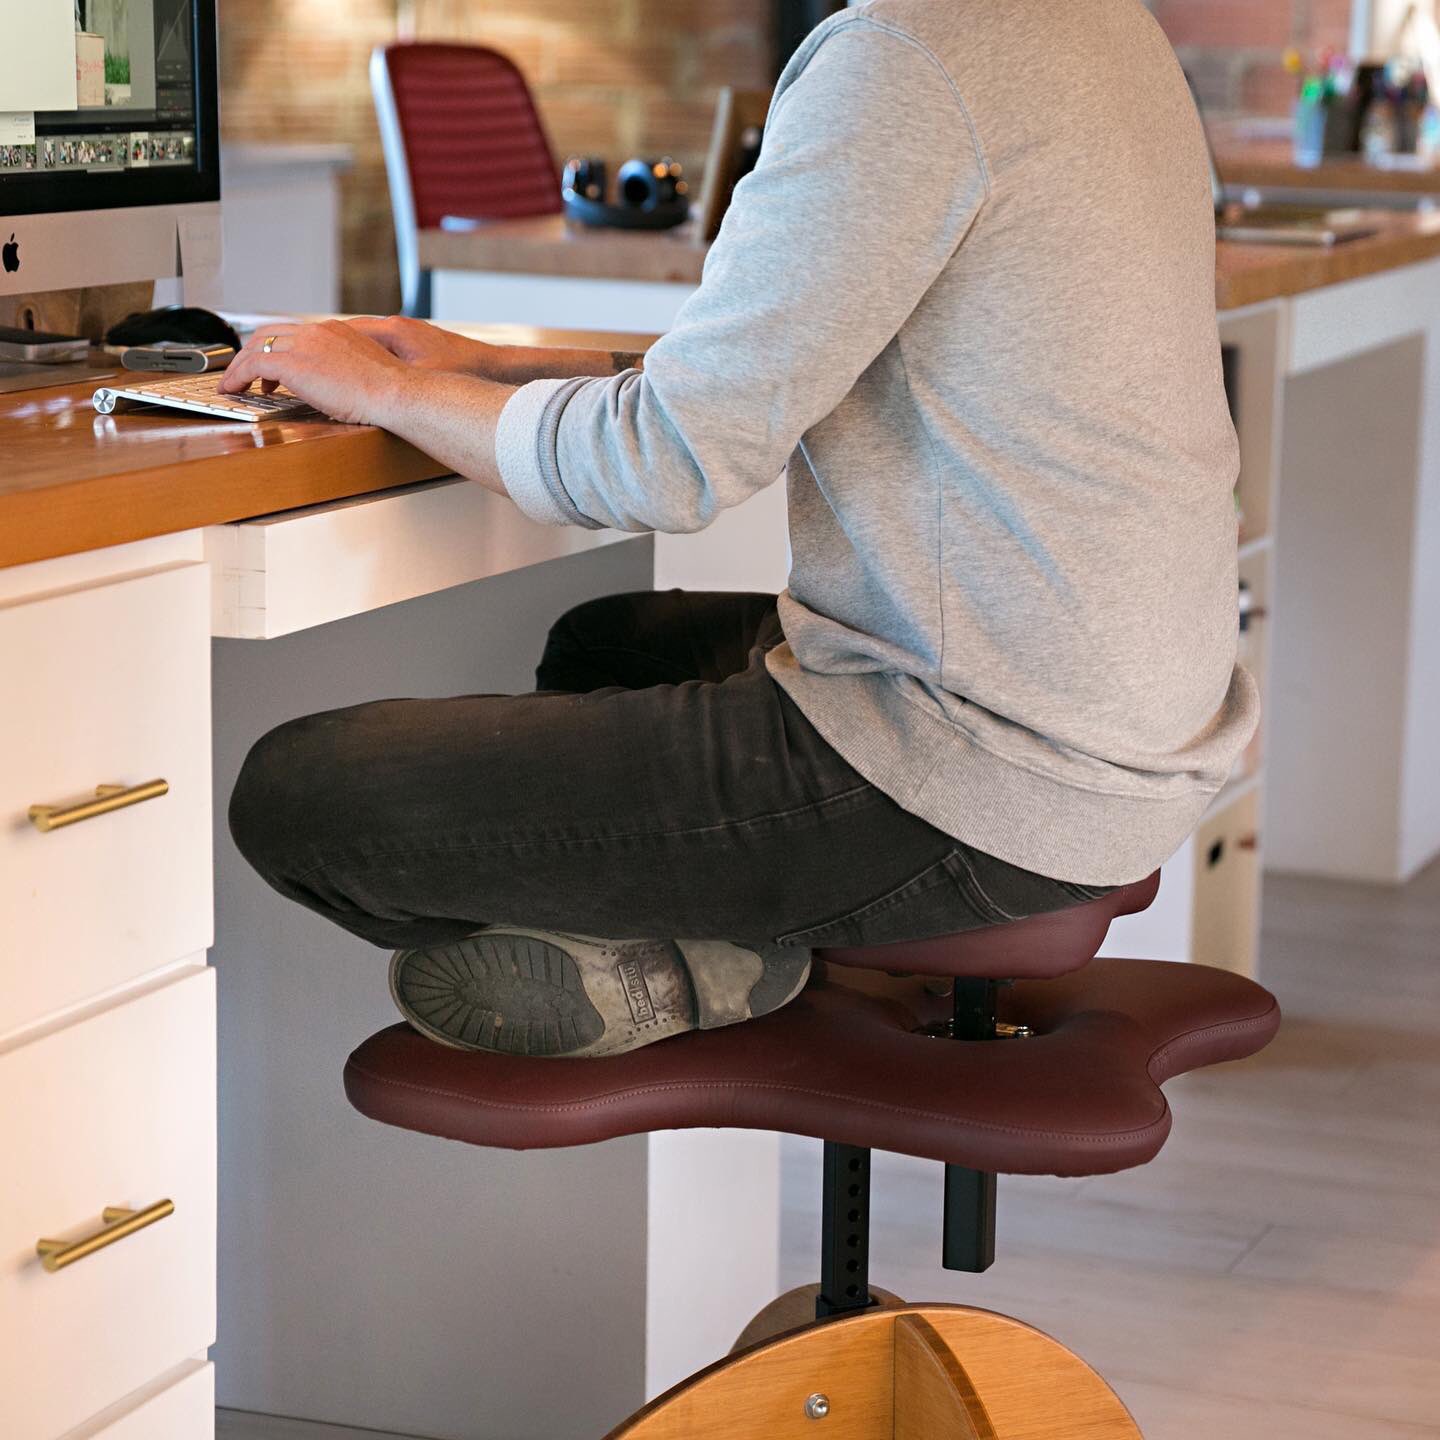 company designs chair for people who love to sit cross-legged